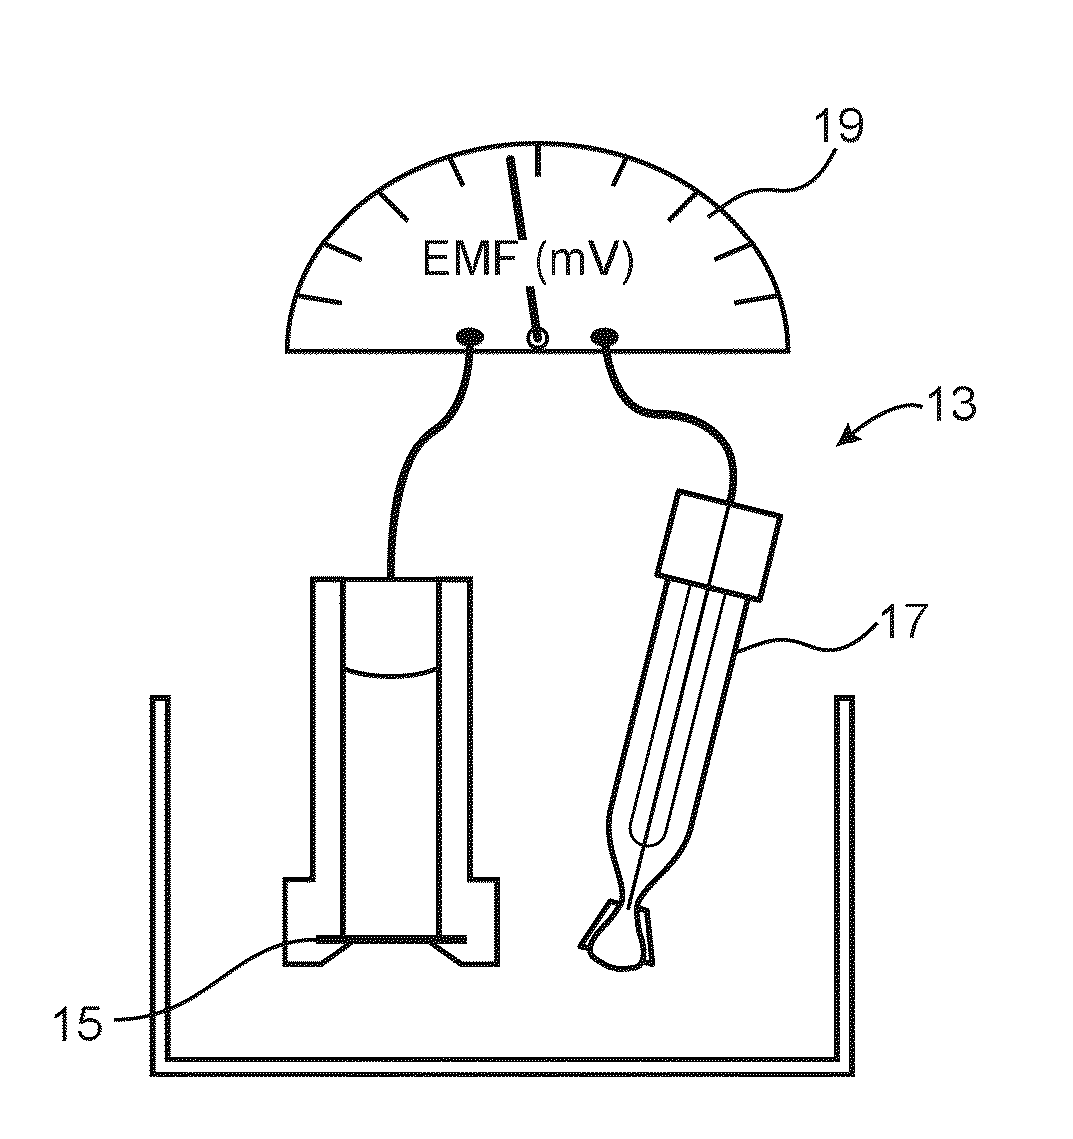 Method for producing a polymer membrane of a polymer membrane electrode for the potentiometric detection of at least one analyte present in a solution